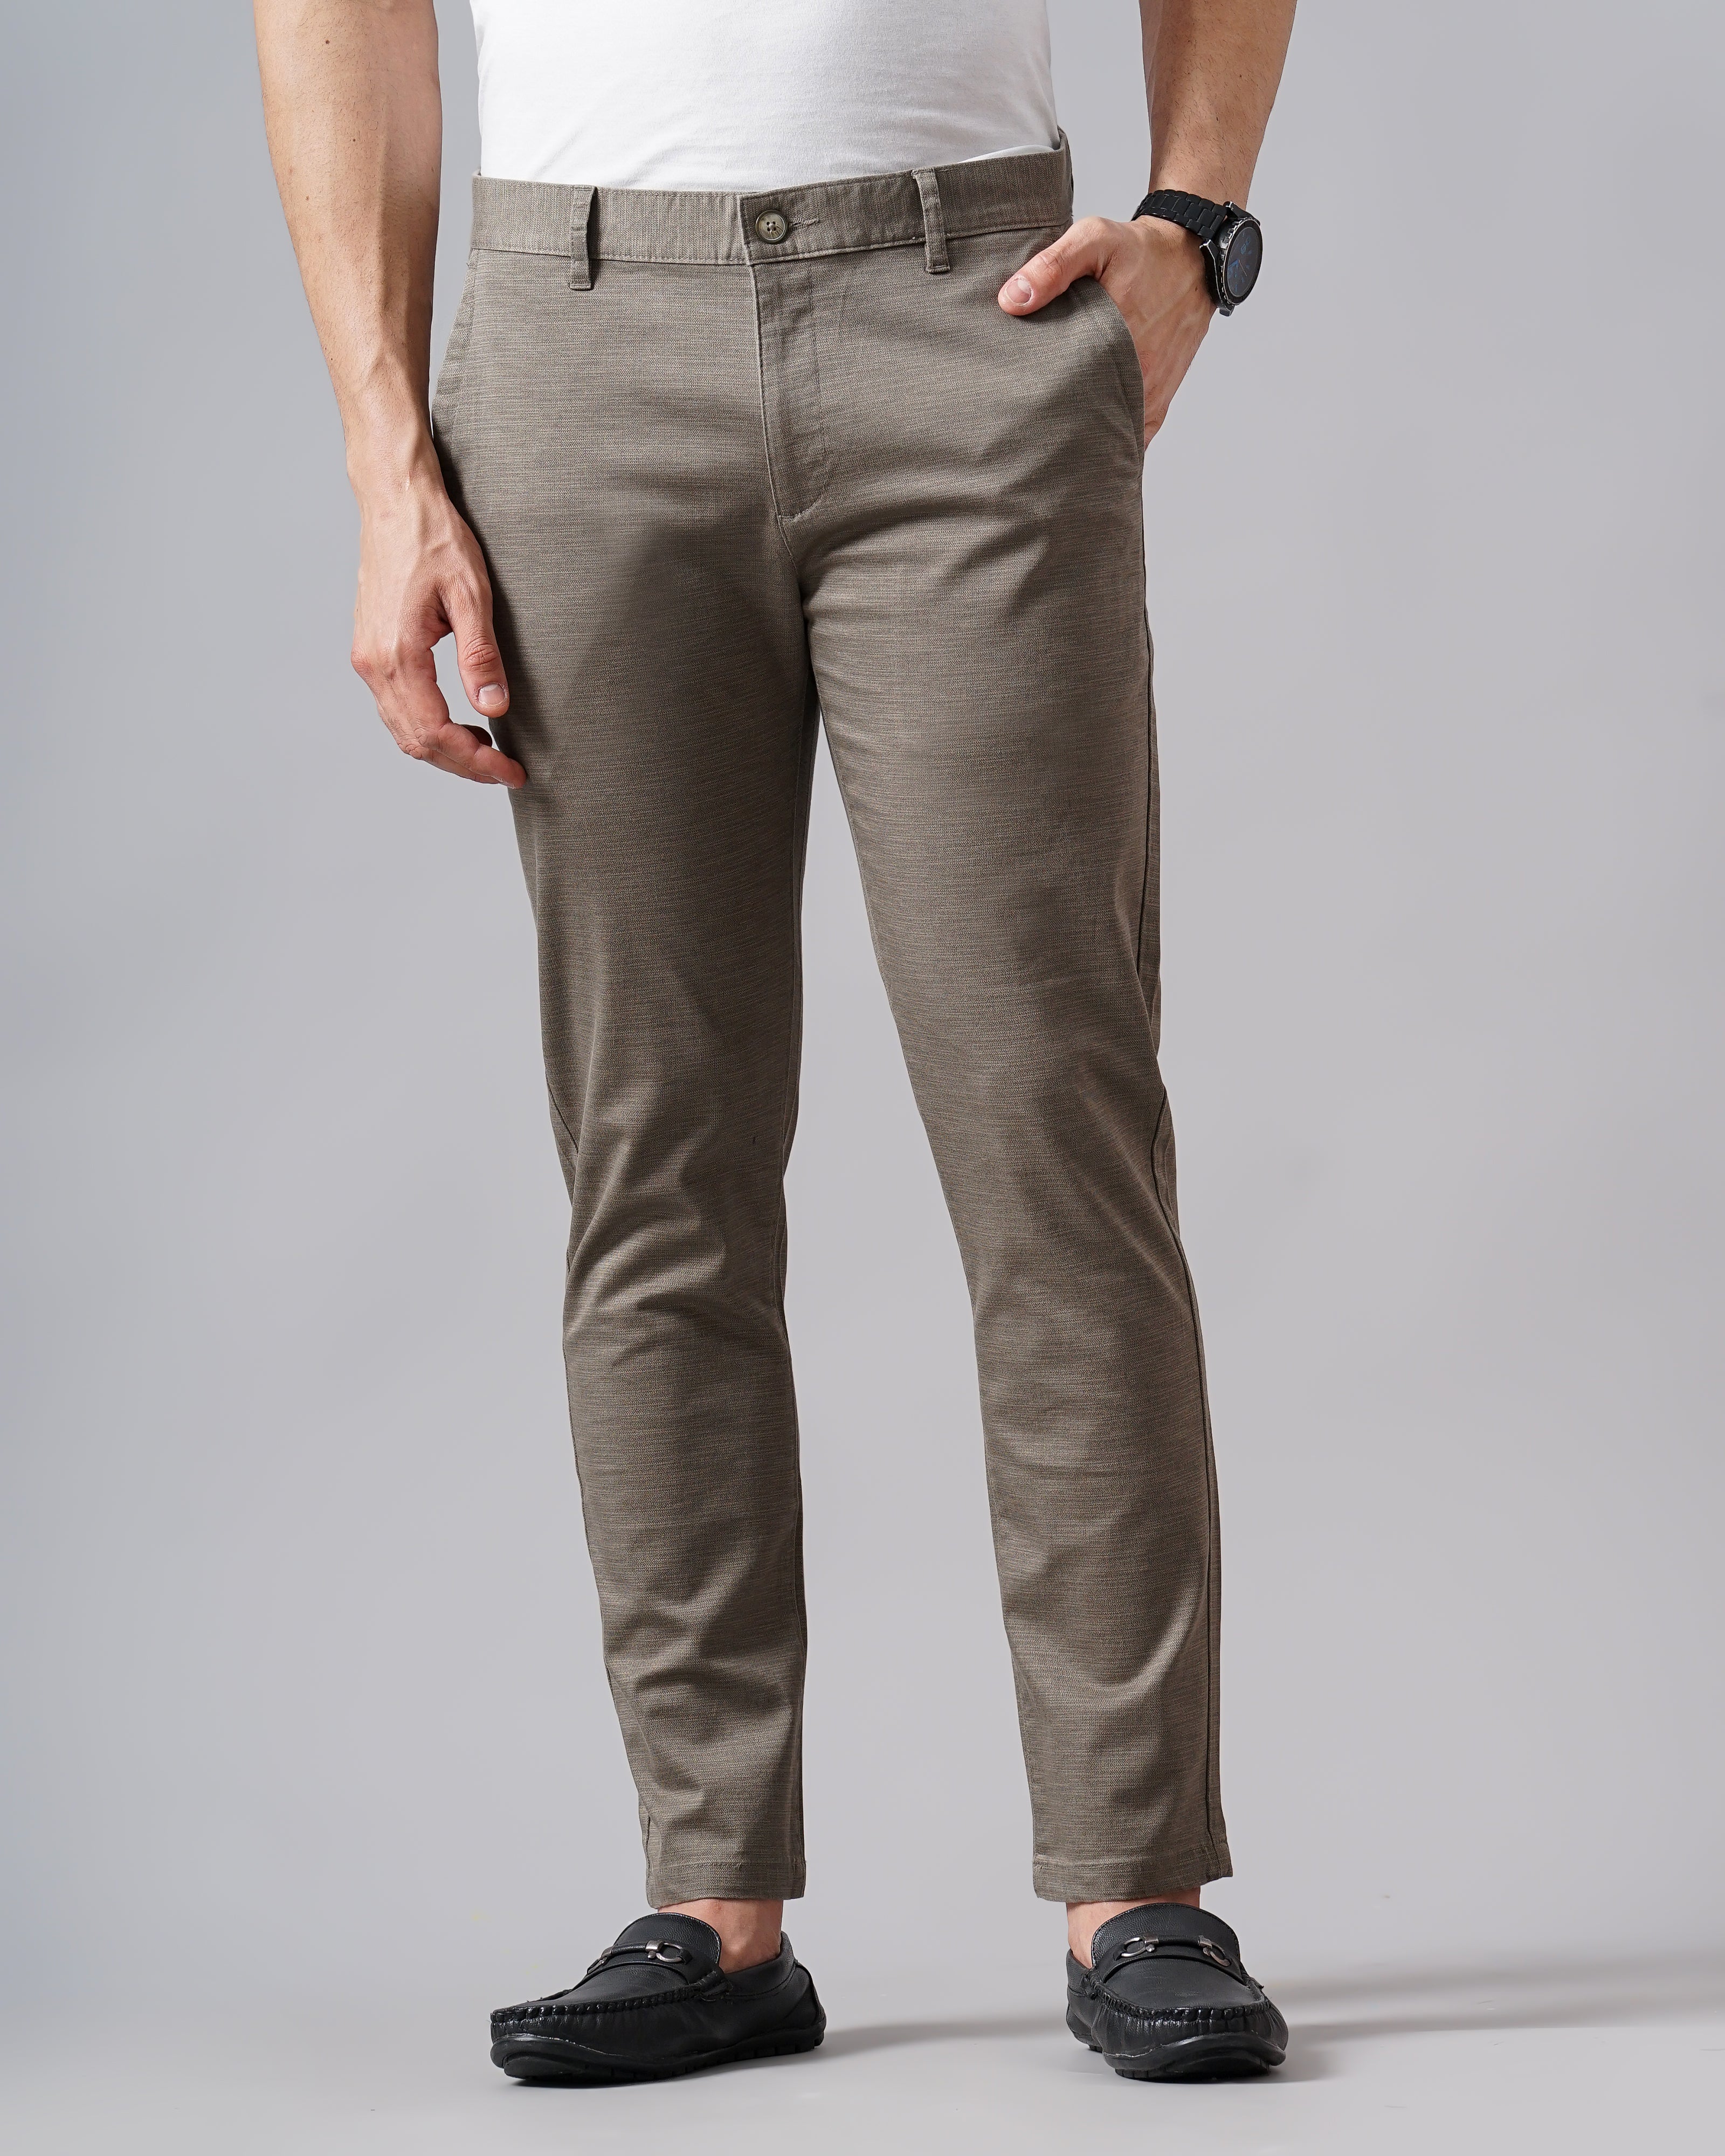 men's casual Chinos